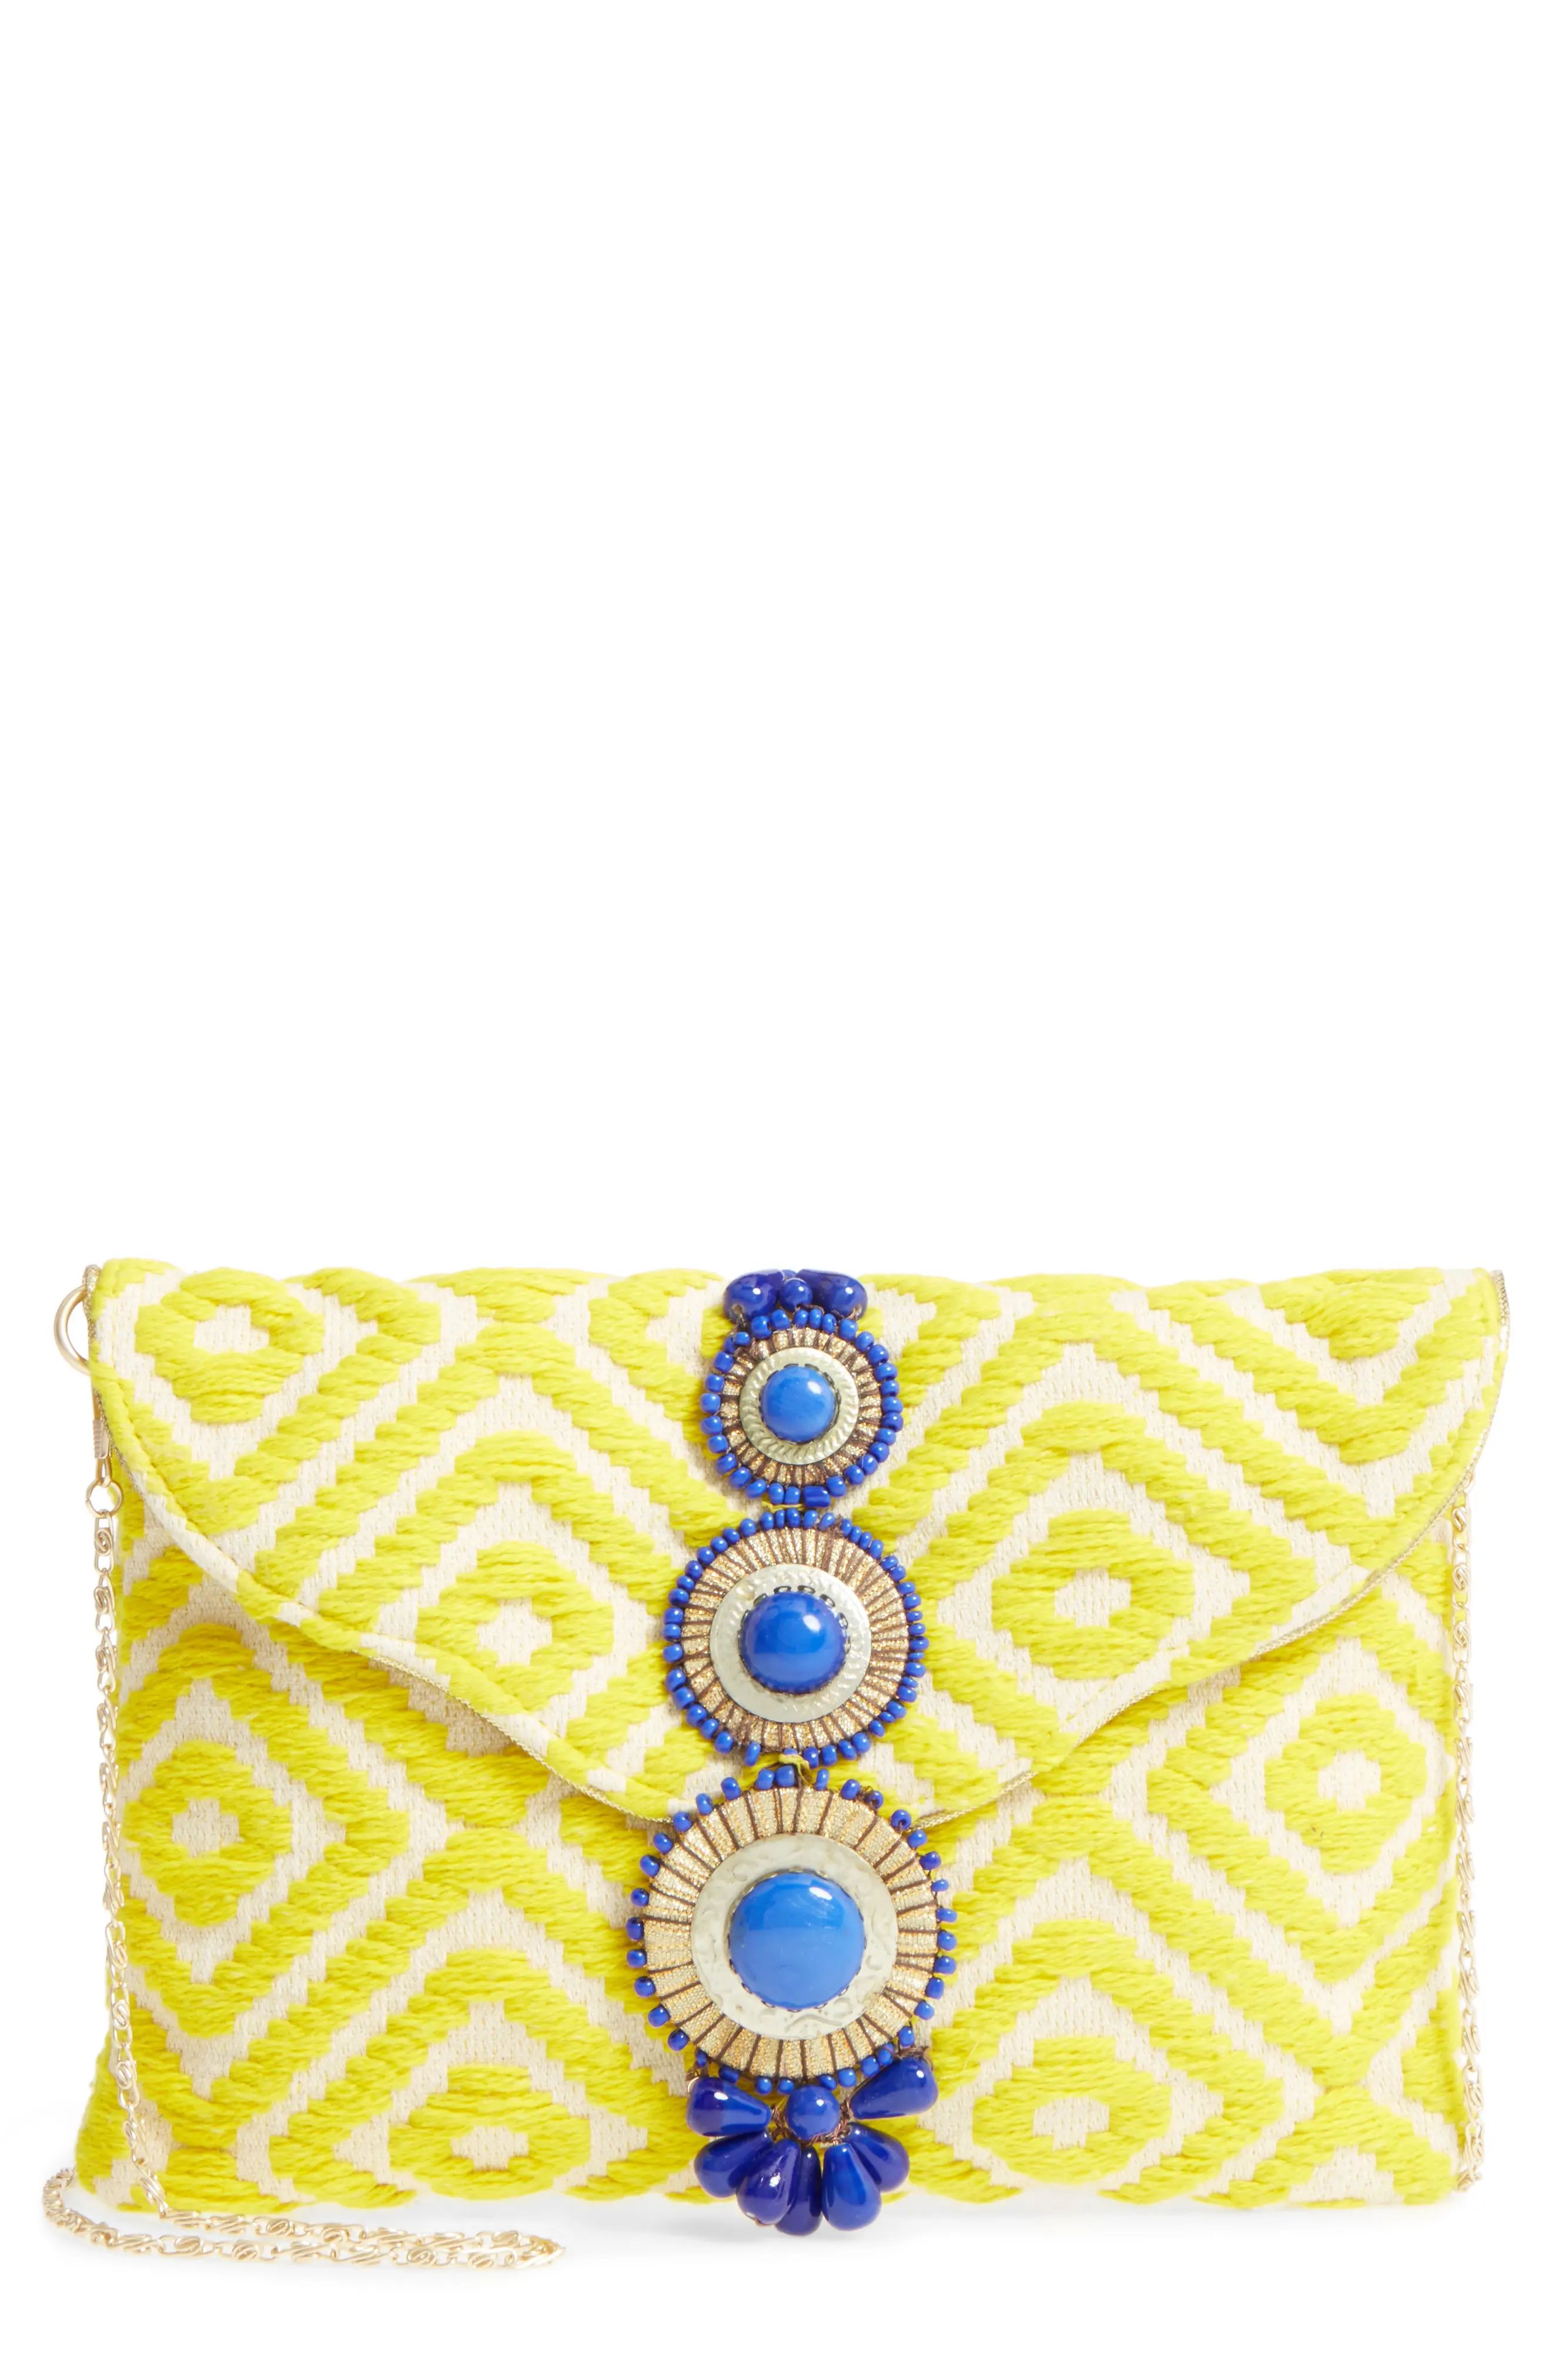 Steven by Steve Madden Beaded & Embroidered Clutch | Nordstrom